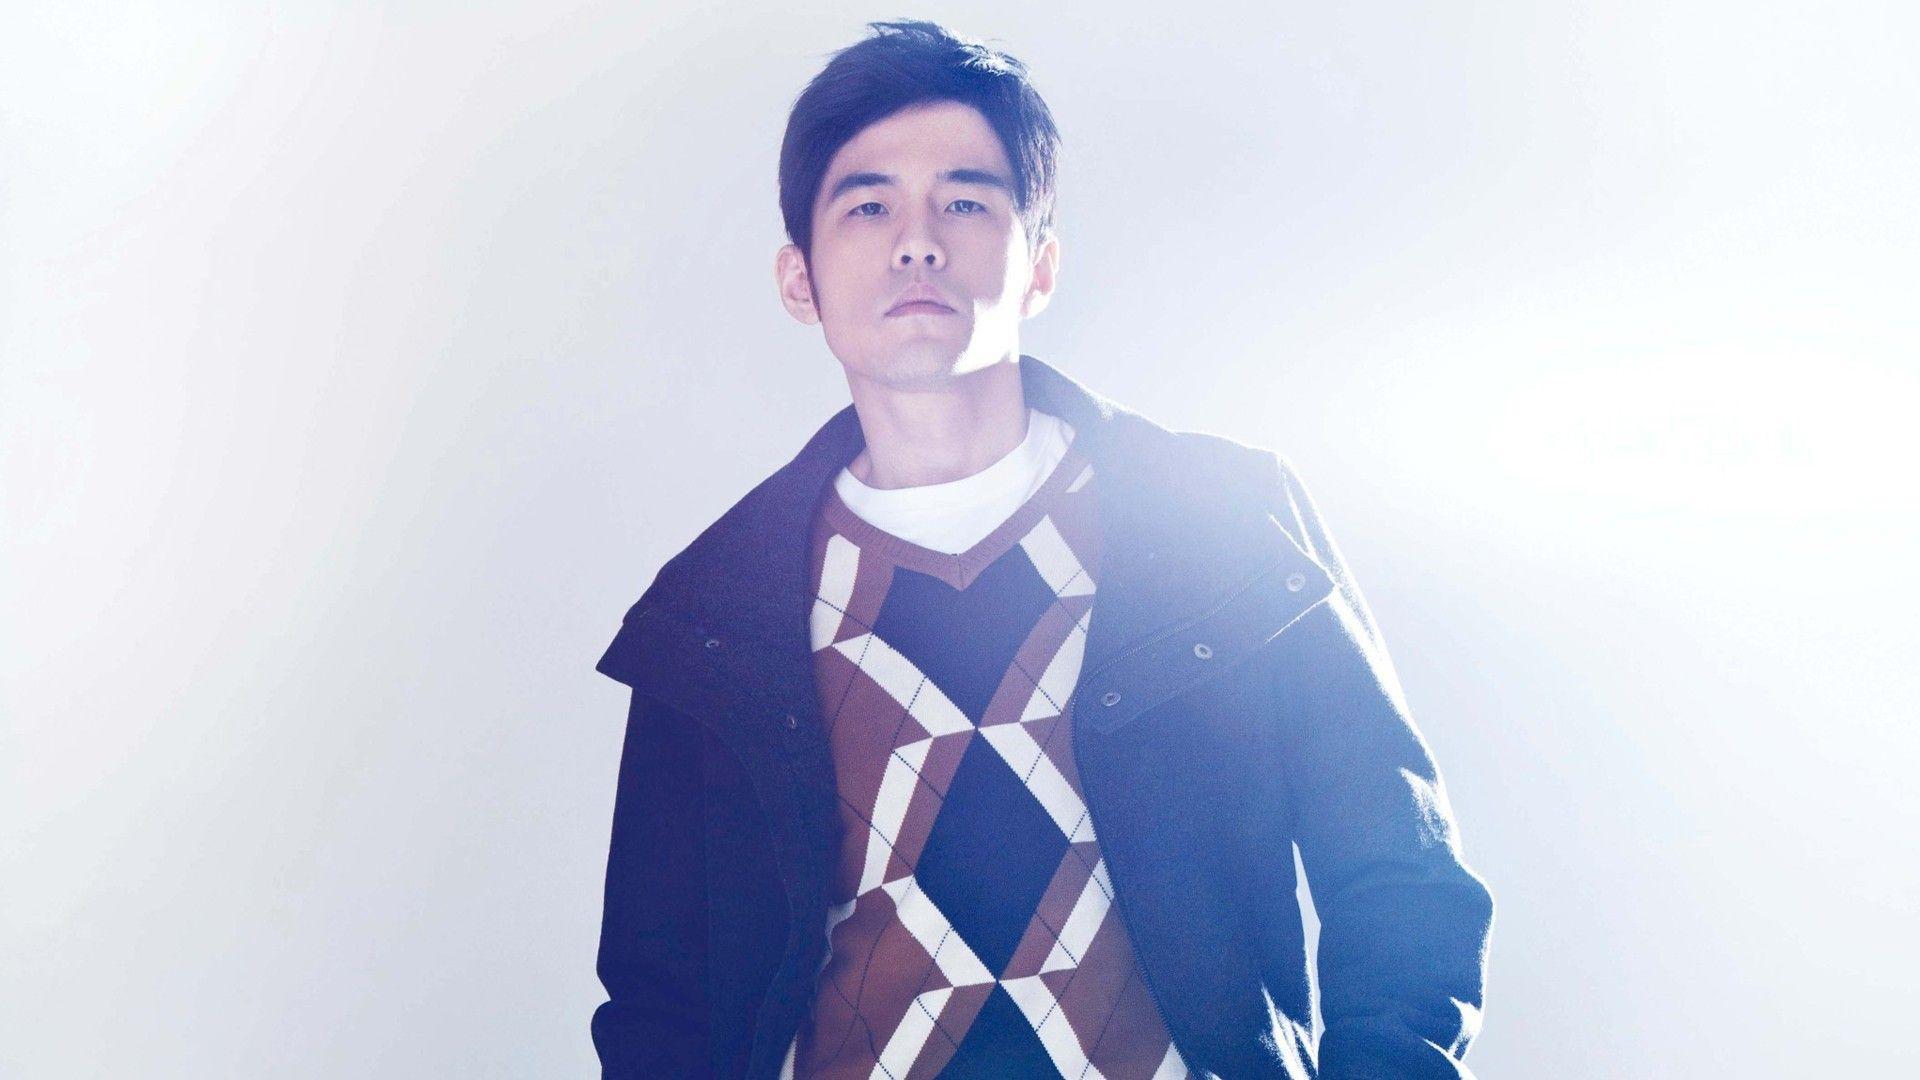 Jay Chou Wallpaper Image Photo Picture Background